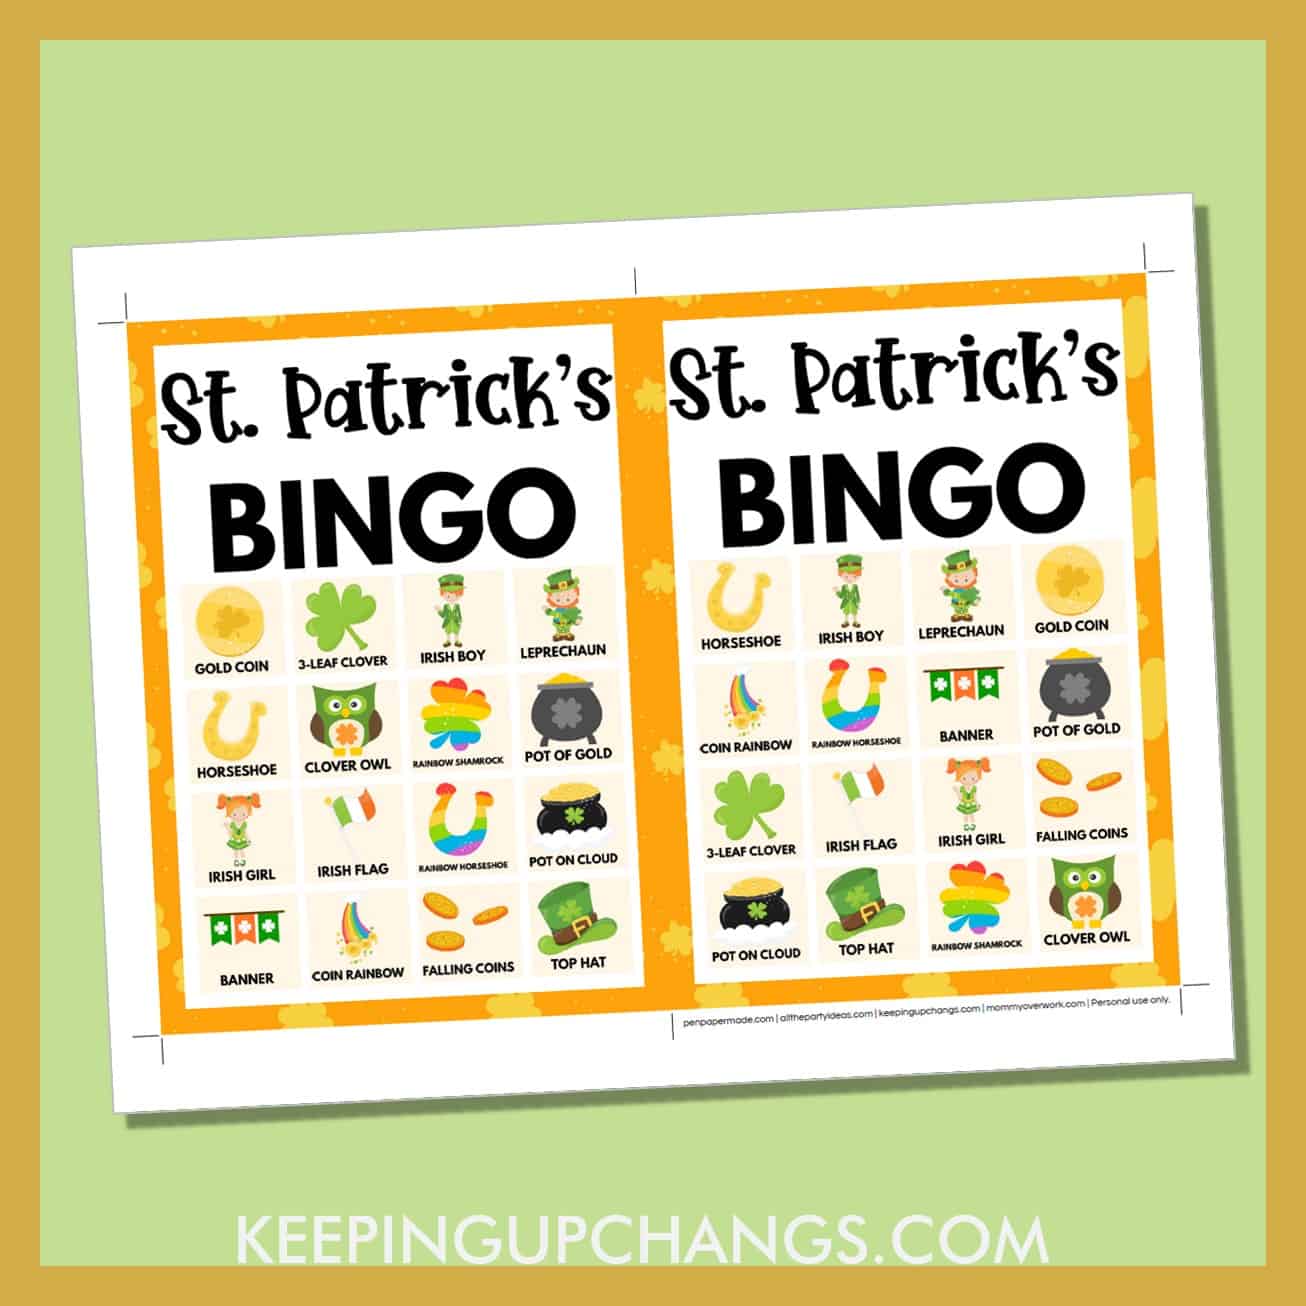 free st patrick's day bingo card 4x4 5x7 game boards with images and text words.